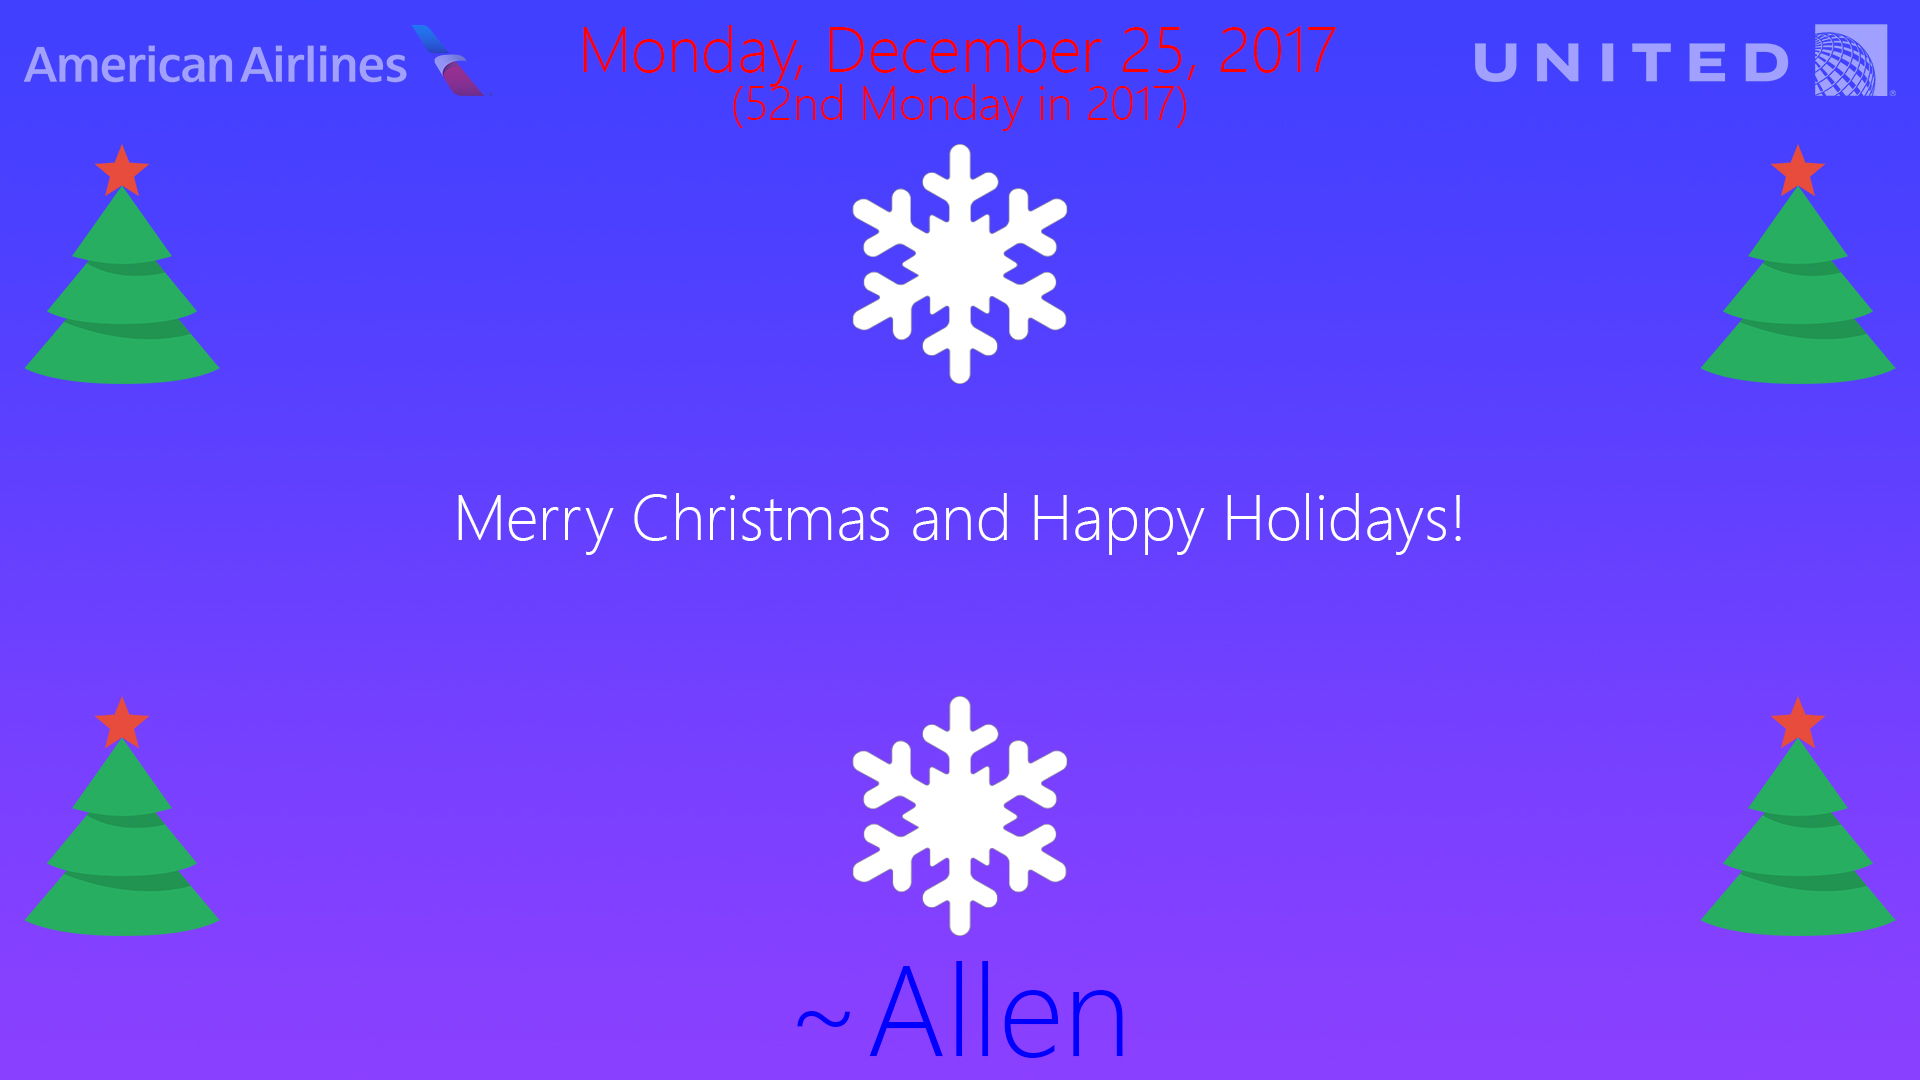 mon_12_25_2017__merry_christmas__by_alle